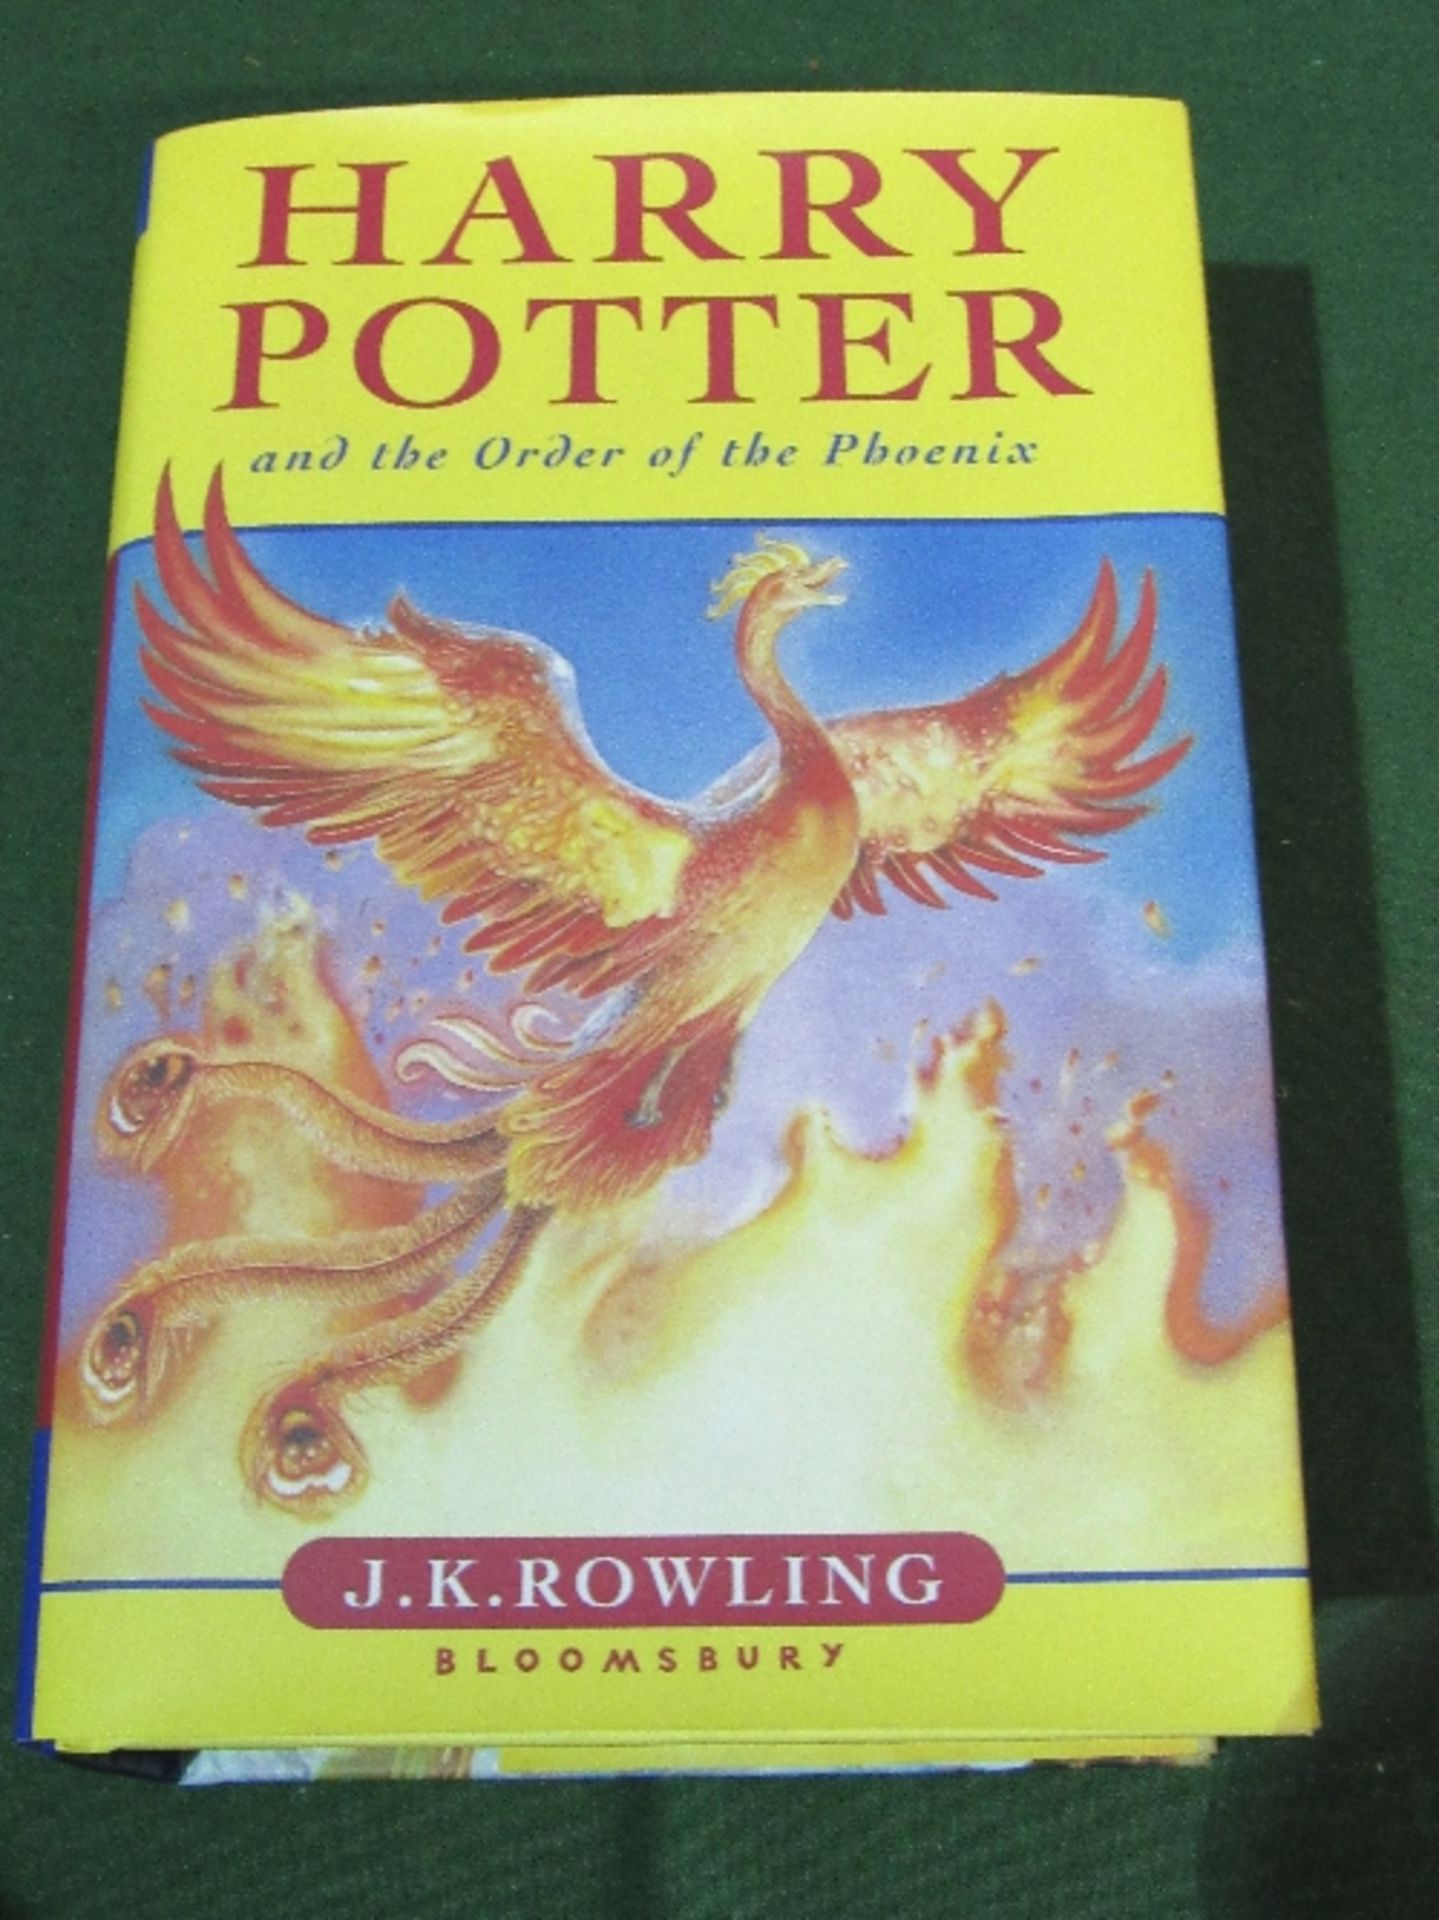 Harry Potter & The Order of The Phoenix, First Edition. Estimate £20-30